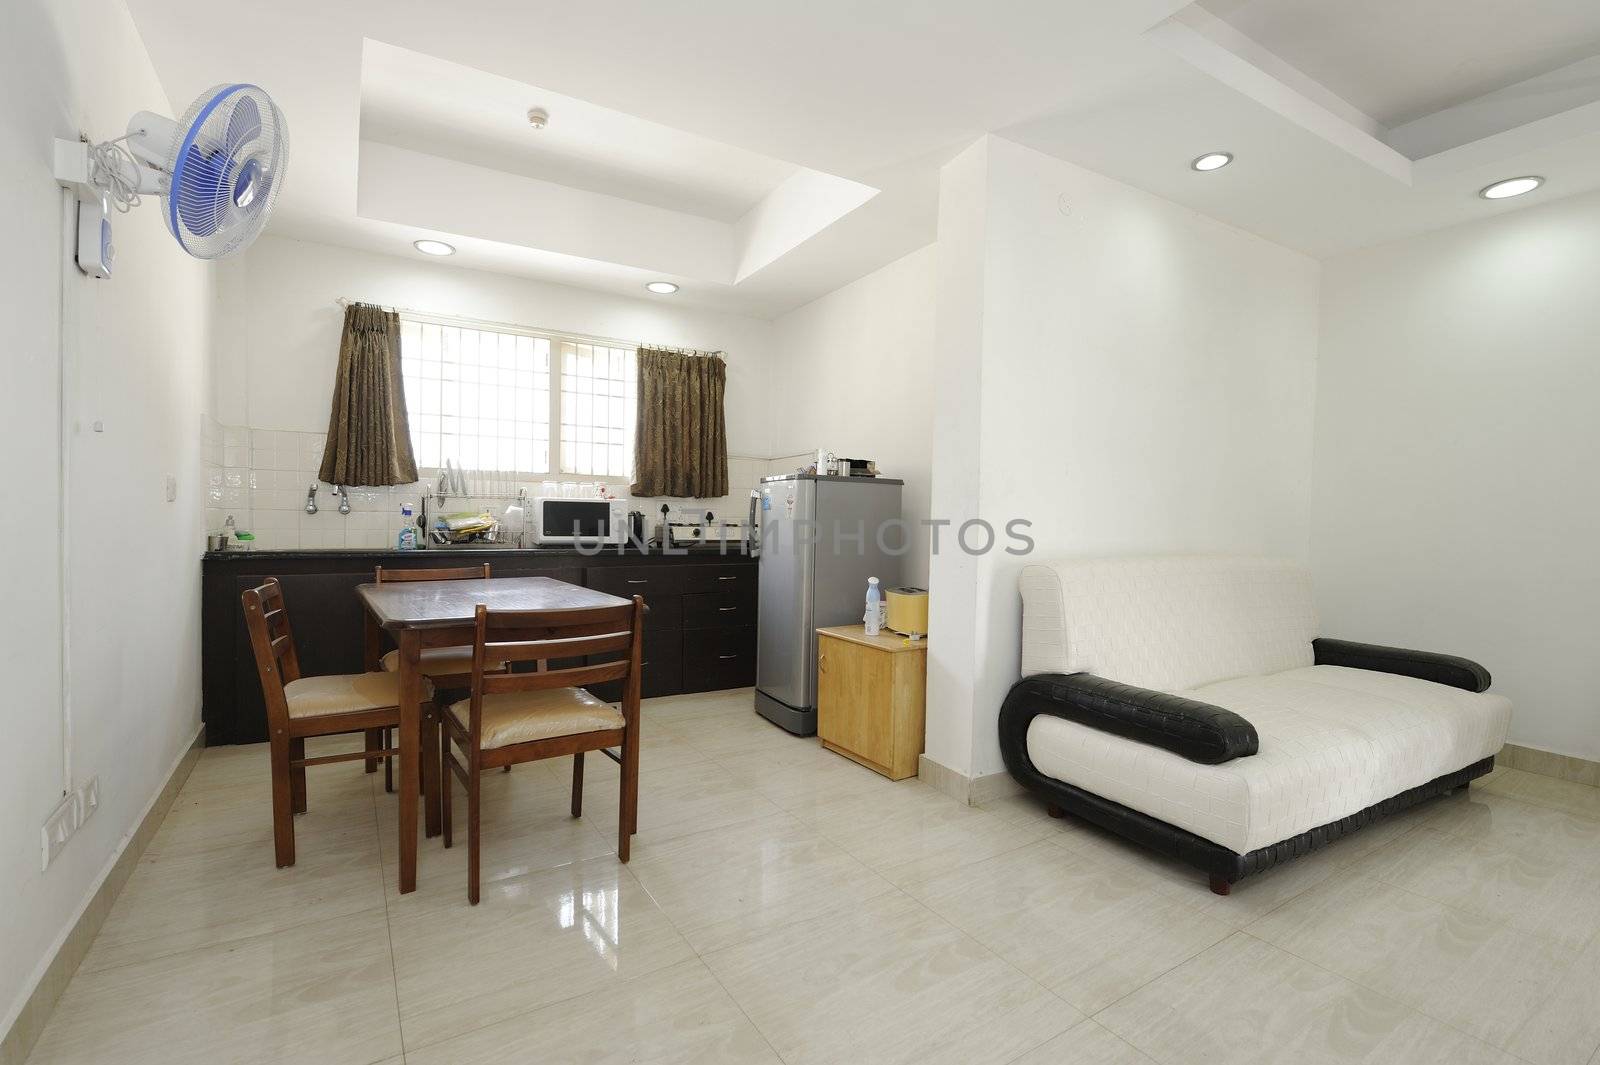 A service apartment available for rent at your locality